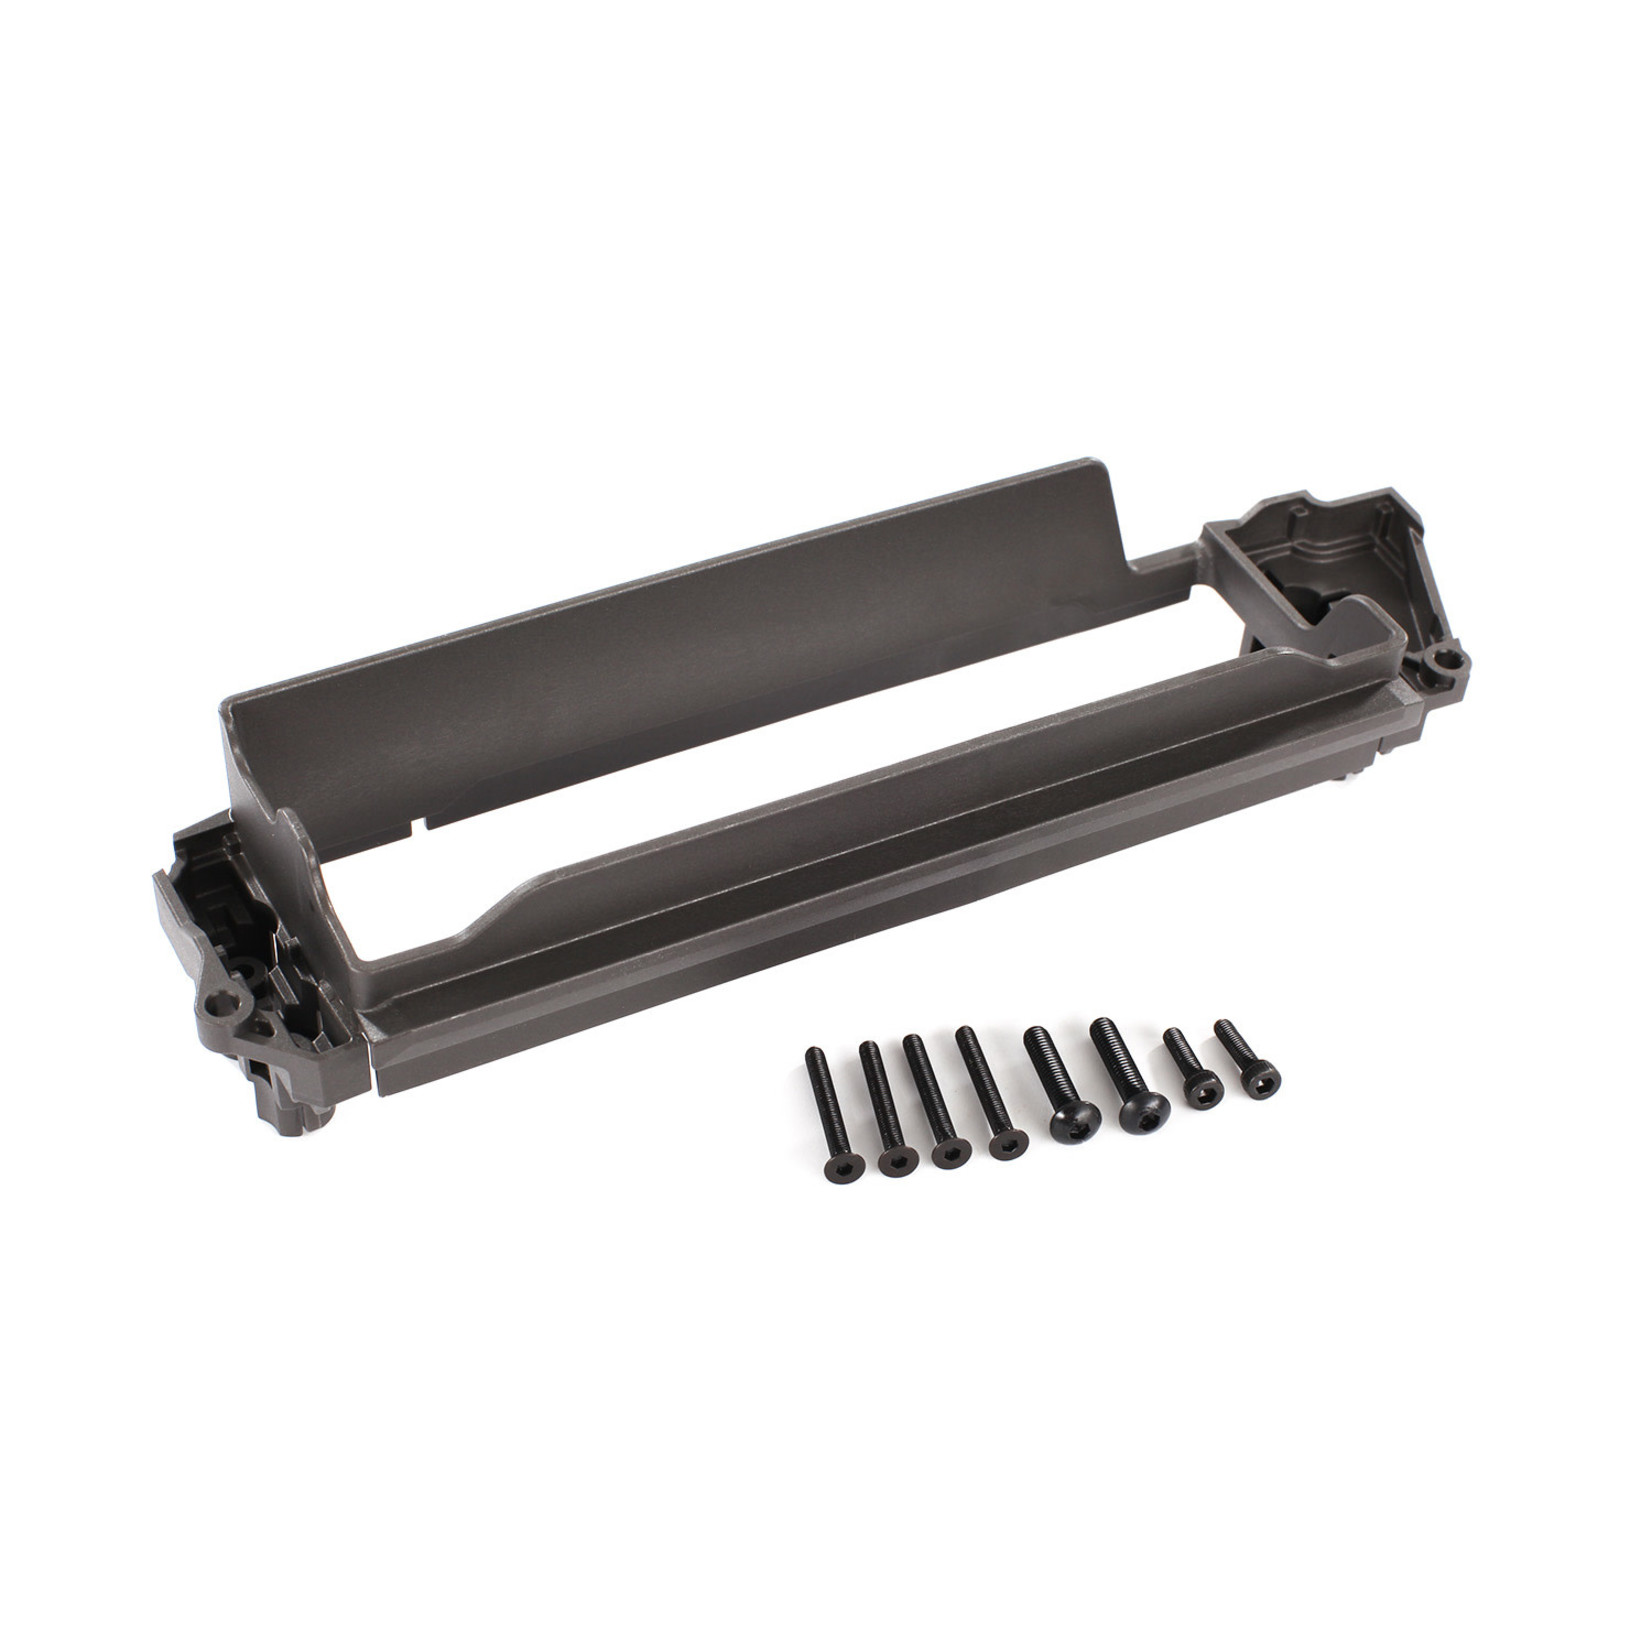 TRAXXAS Battery expansion kit, Maxx® (allows for installation of taller battery packs)